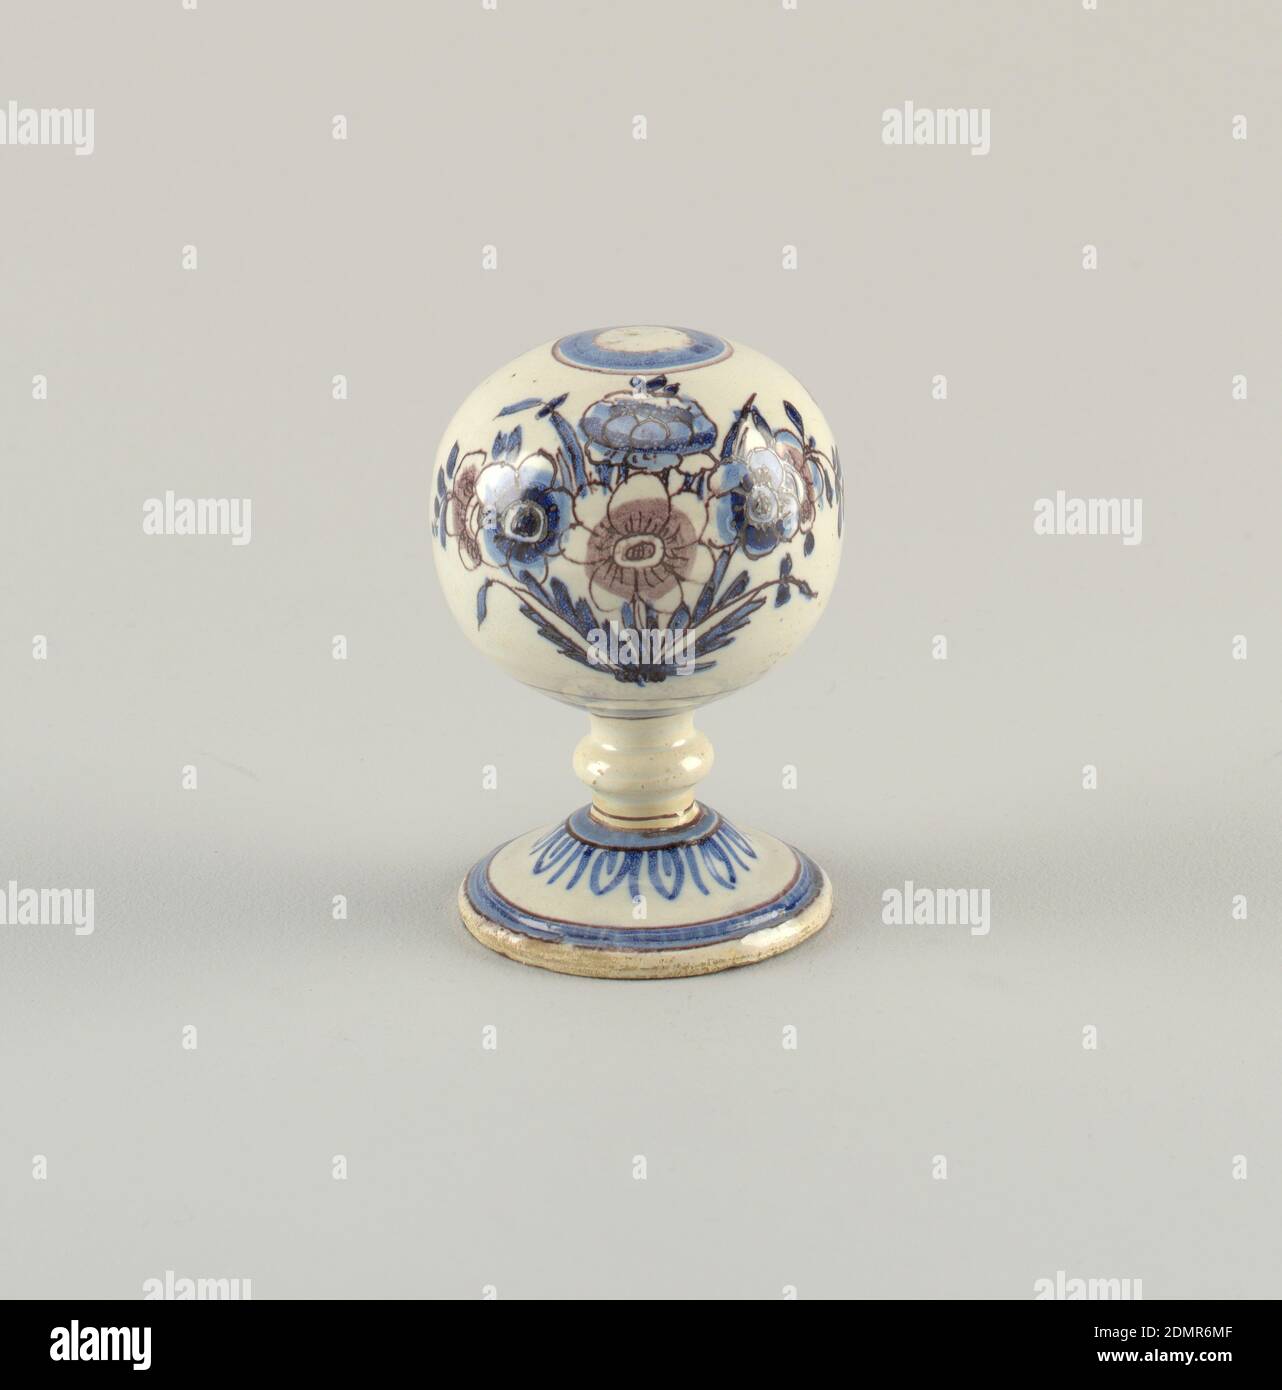 Cap stand, Tin-glazed earthenware, Cobalt blue and manganese purple decoration showing flowers and a bee on globe. Ring of leaves at base of neck. Circles at edge of foot and top of globe., Nevers, France, mid-18th century, ceramics, Decorative Arts, Cap stand Stock Photo